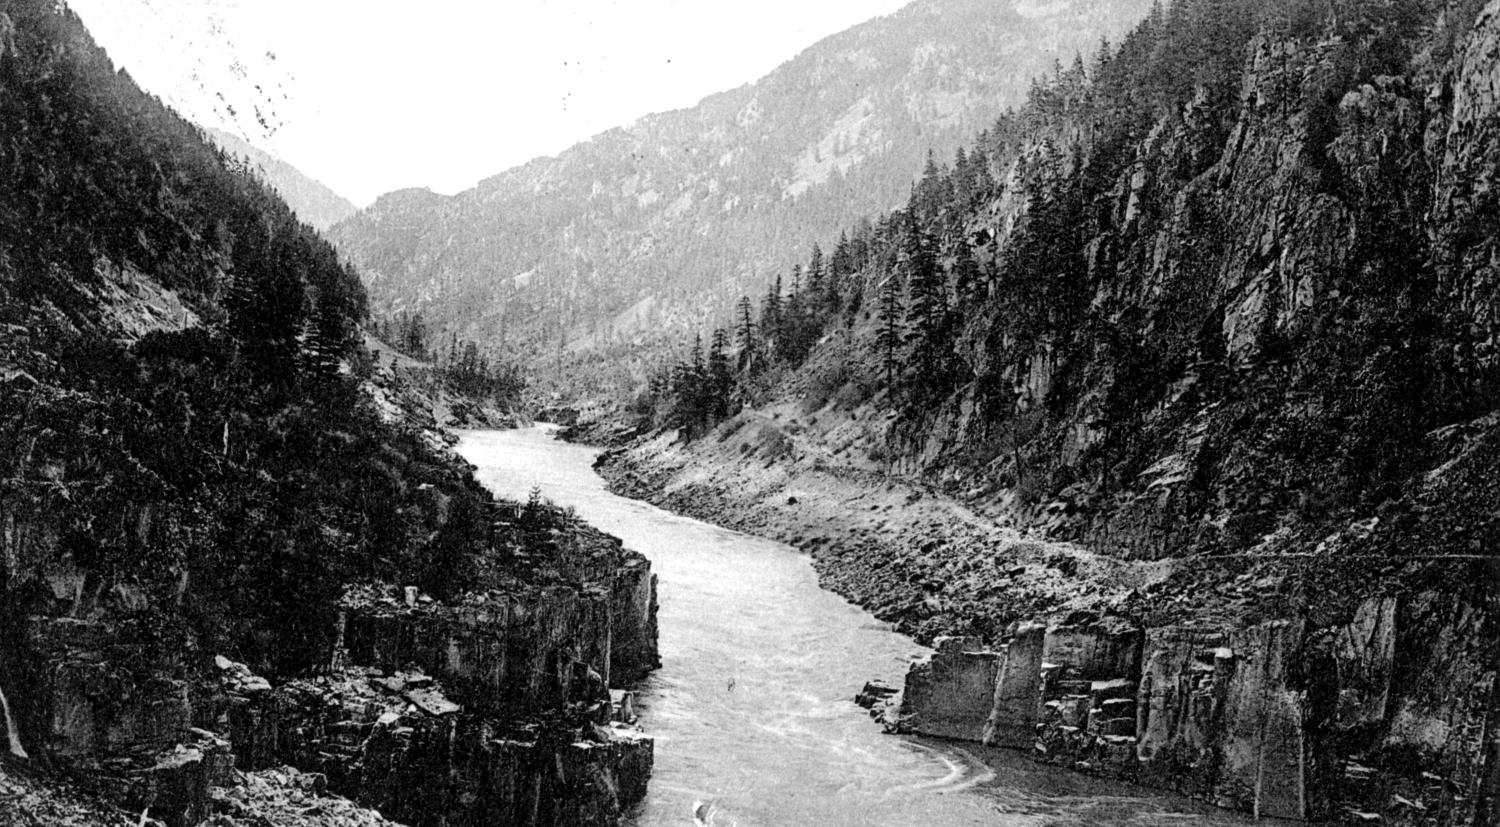 Black and white photo of Hell's Gate, before the landslide